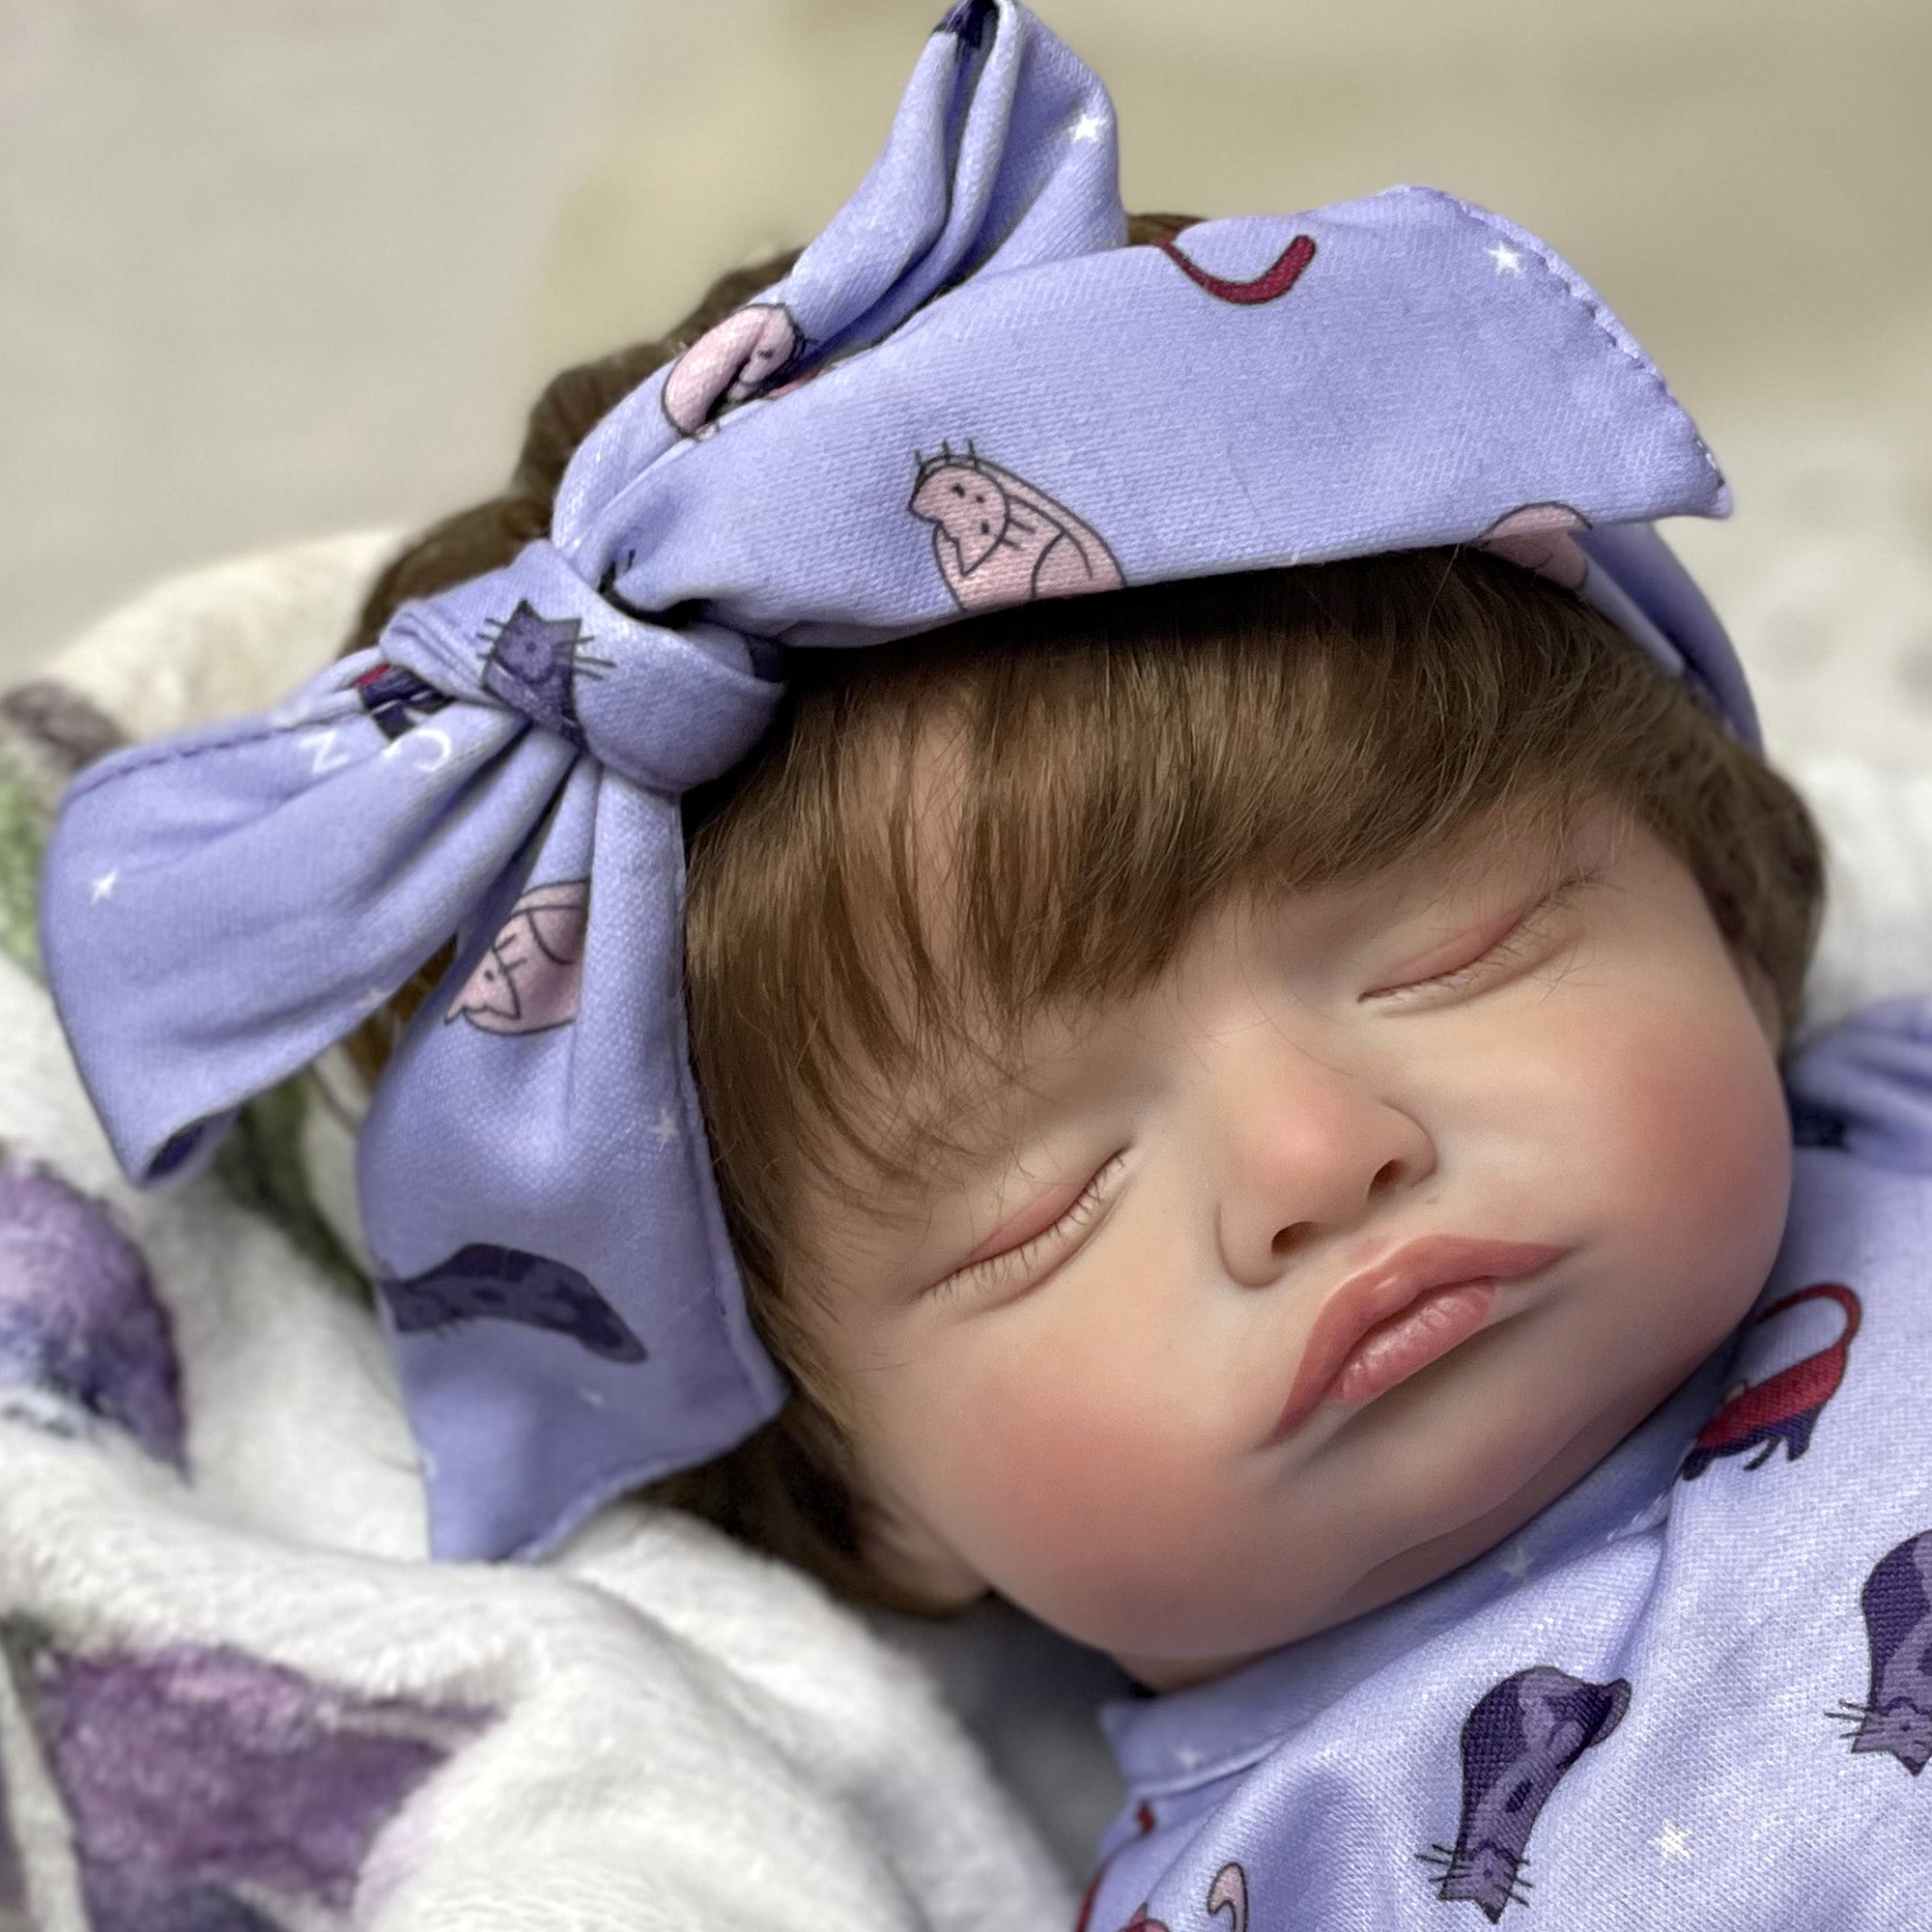 T51 18 Inch Rosalie Reborn Dolls Finished Soft Vinyl Lifelike Sleeping face Reborn baby with Rooted Mohair